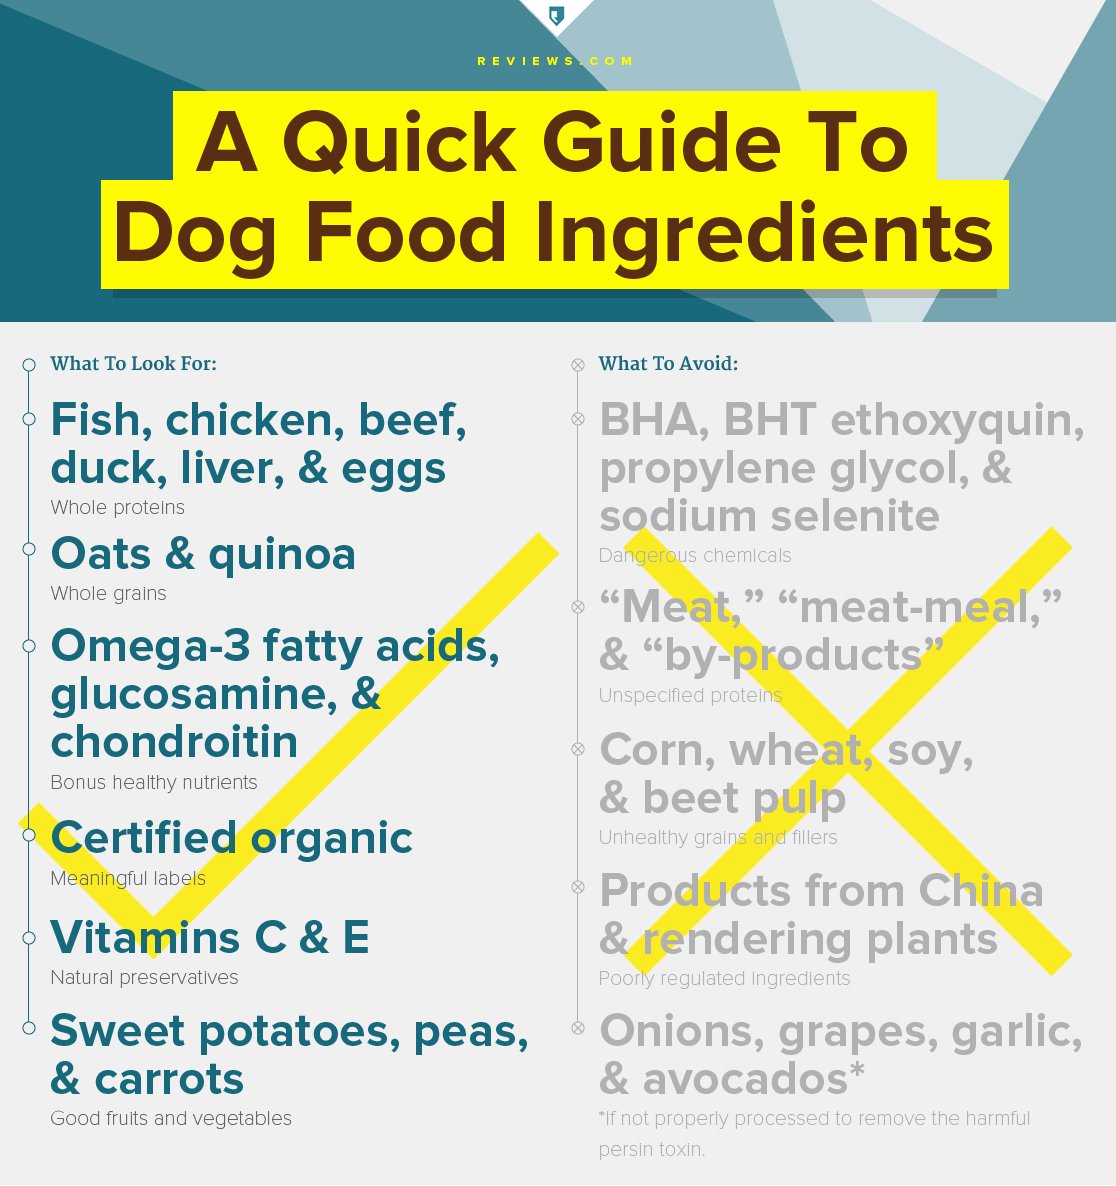 What Are the Ingredients in Farmer's Dog Food?